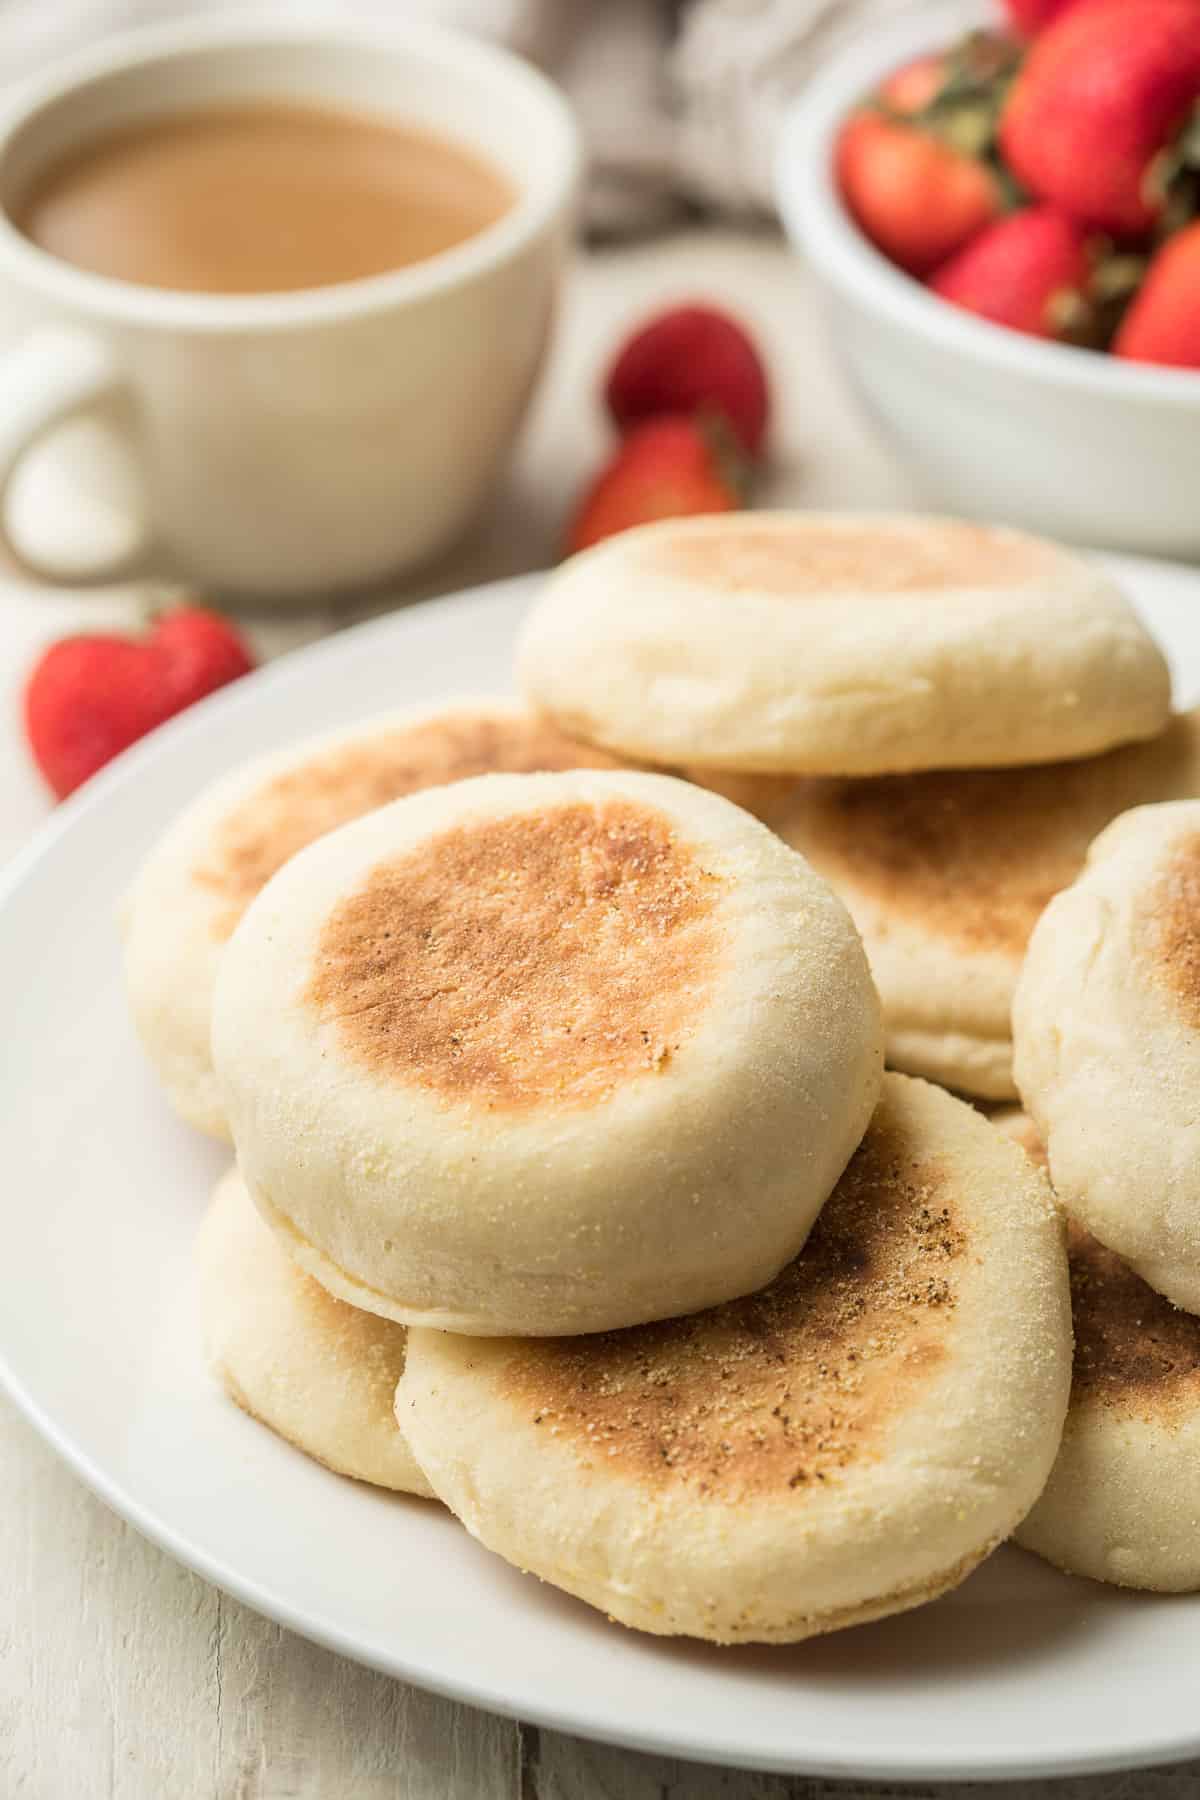 Plate of Vegan English Muffins with coffee cup and strawberries in the background.